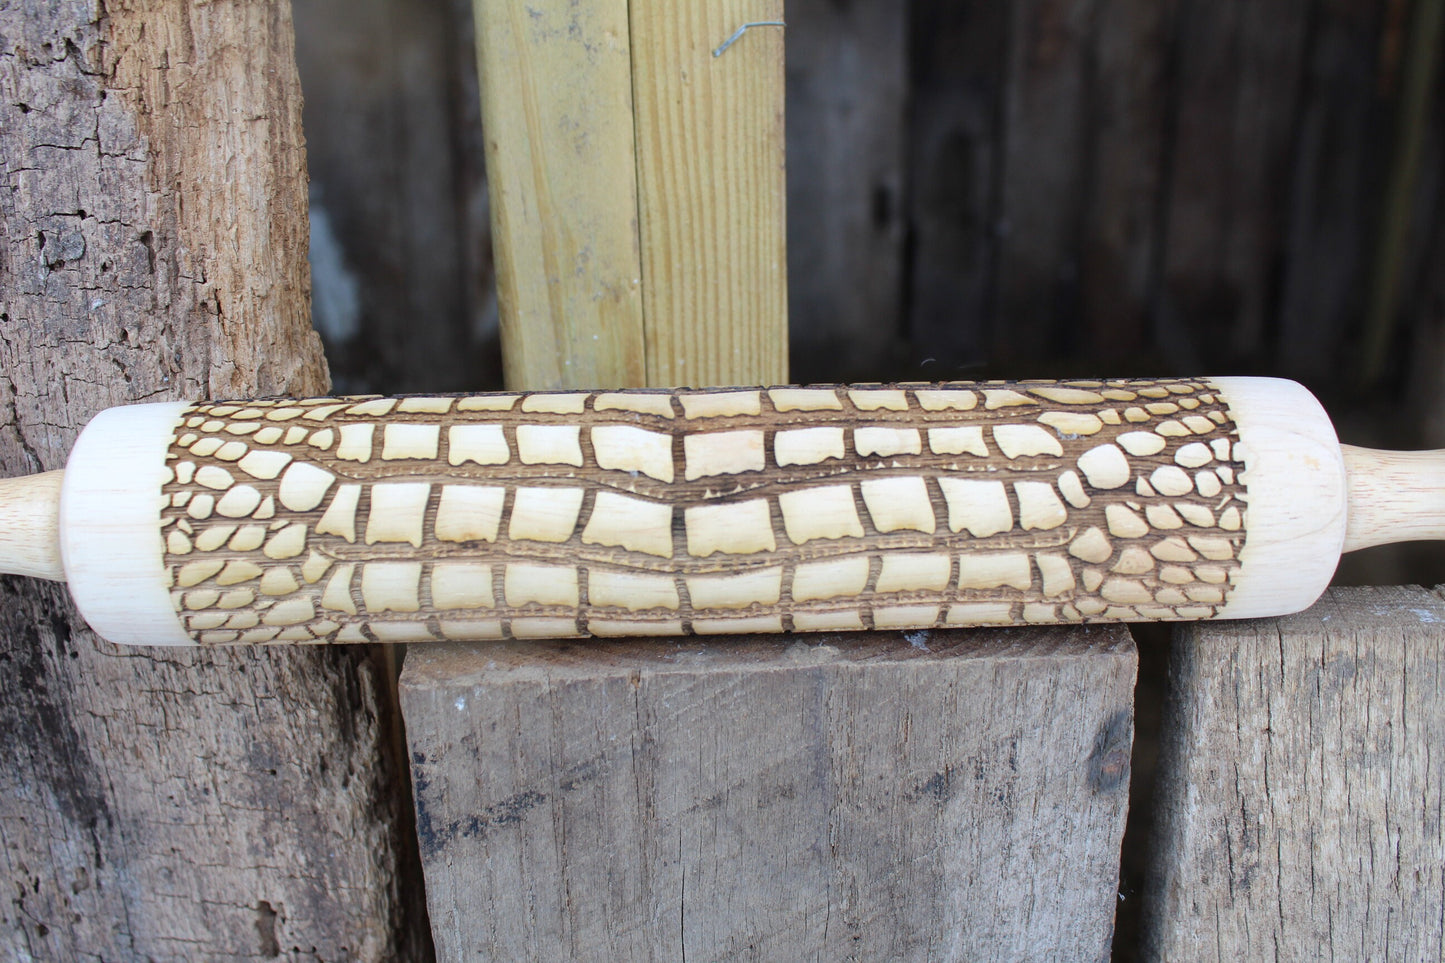 Scale Pattern Alligator Crocodile Reptile Scales 10 Inch Rolling Pin Pie Crust Gift Embossed Pottery Texture Roller Cookie Stamp